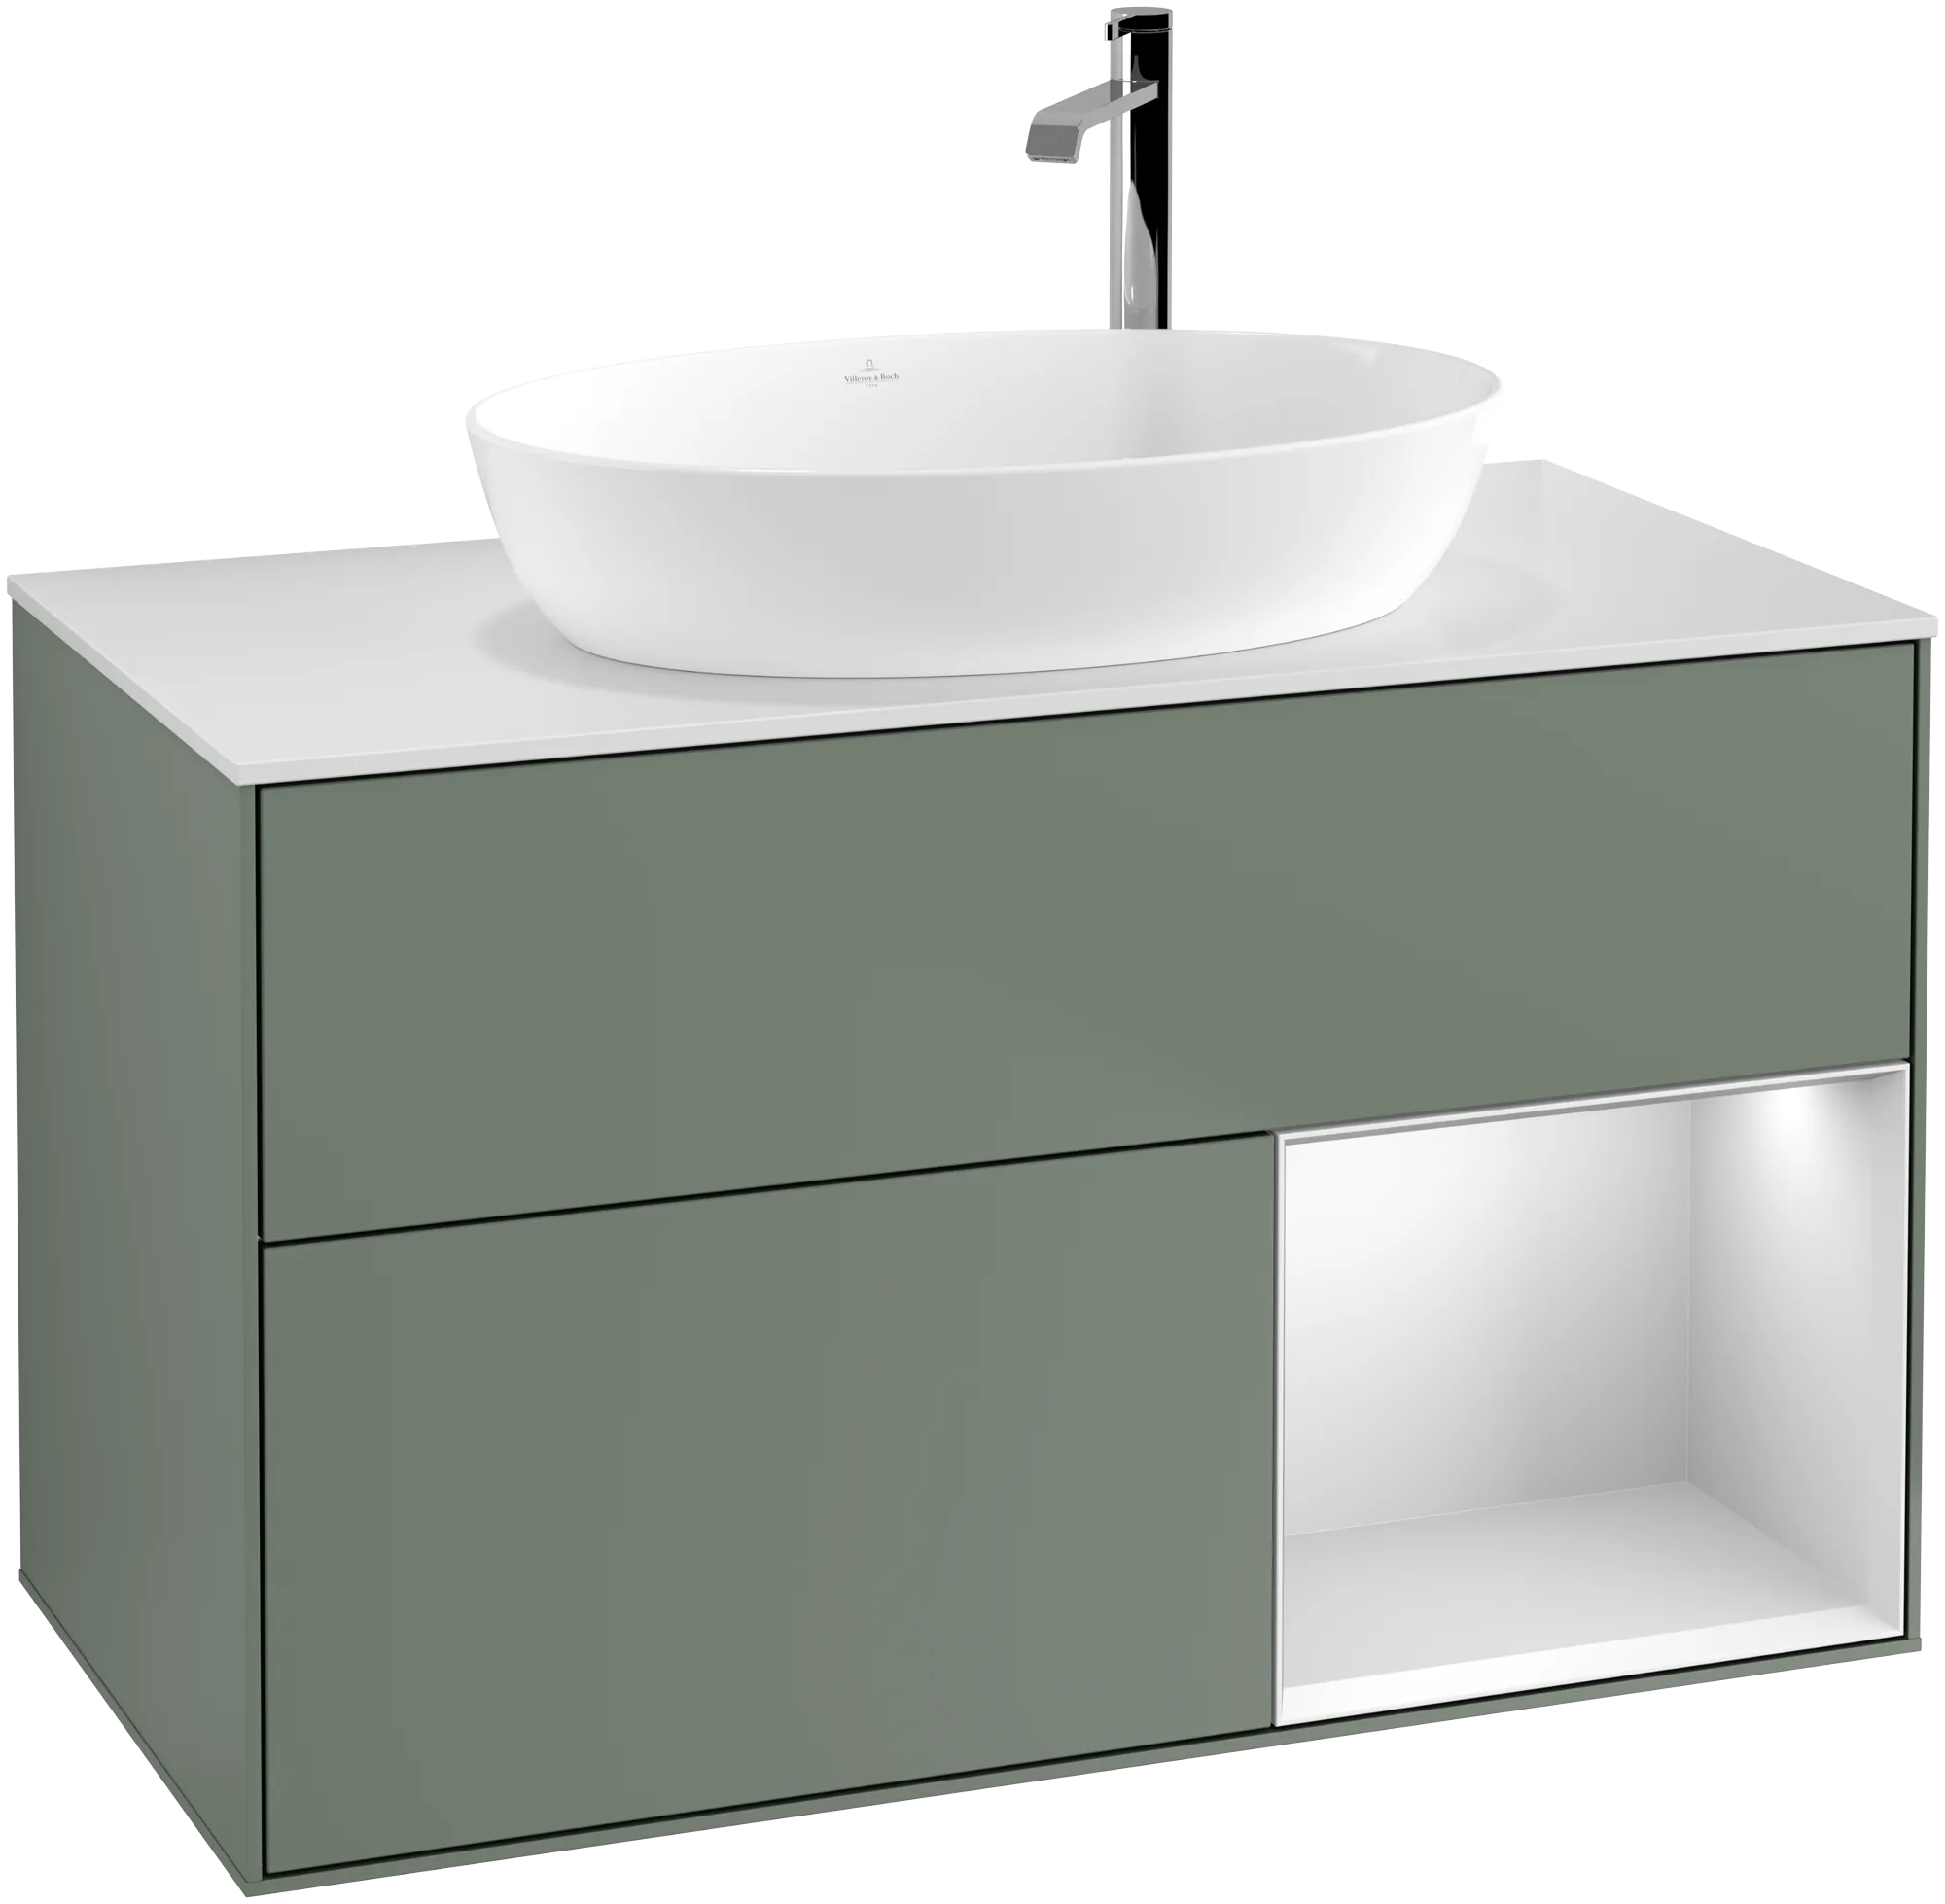 VILLEROY BOCH Finion Vanity unit, with lighting, 2 pull-out compartments, 1000 x 603 x 501 mm, Olive Matt Lacquer / White Matt Lacquer / Glass White Matt #G901MTGM resmi